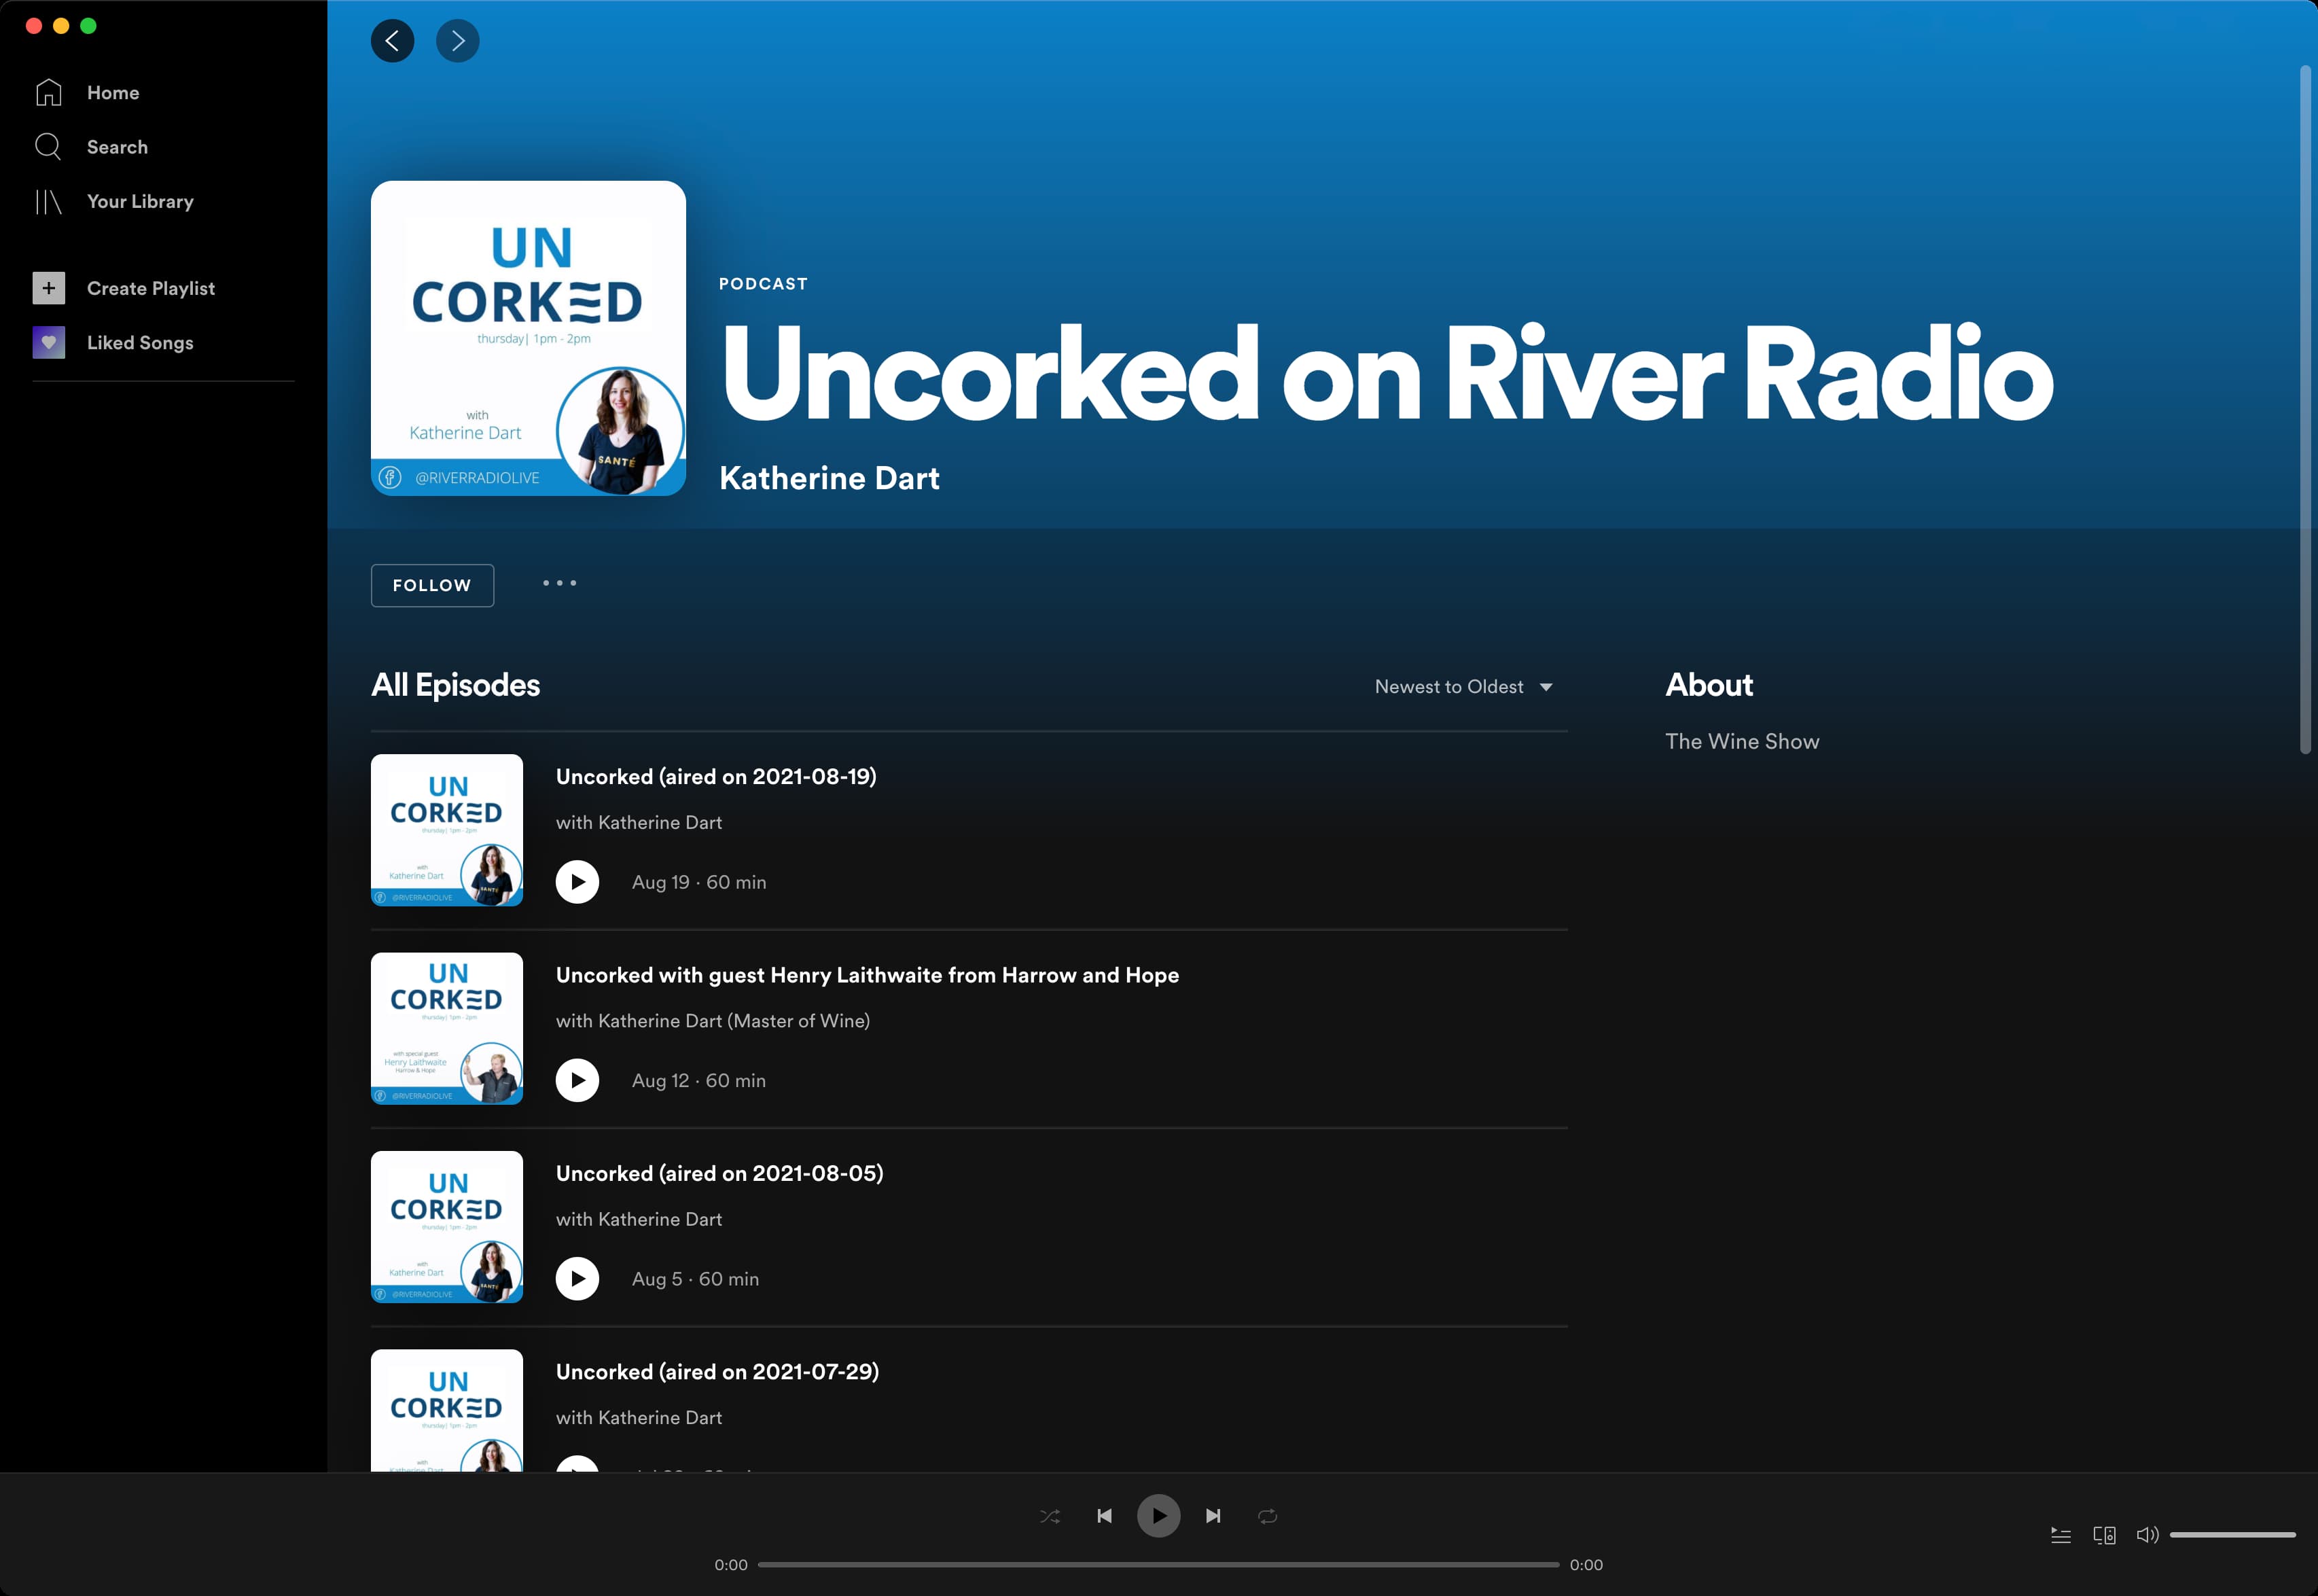 River Radio Uncorked on Spotify